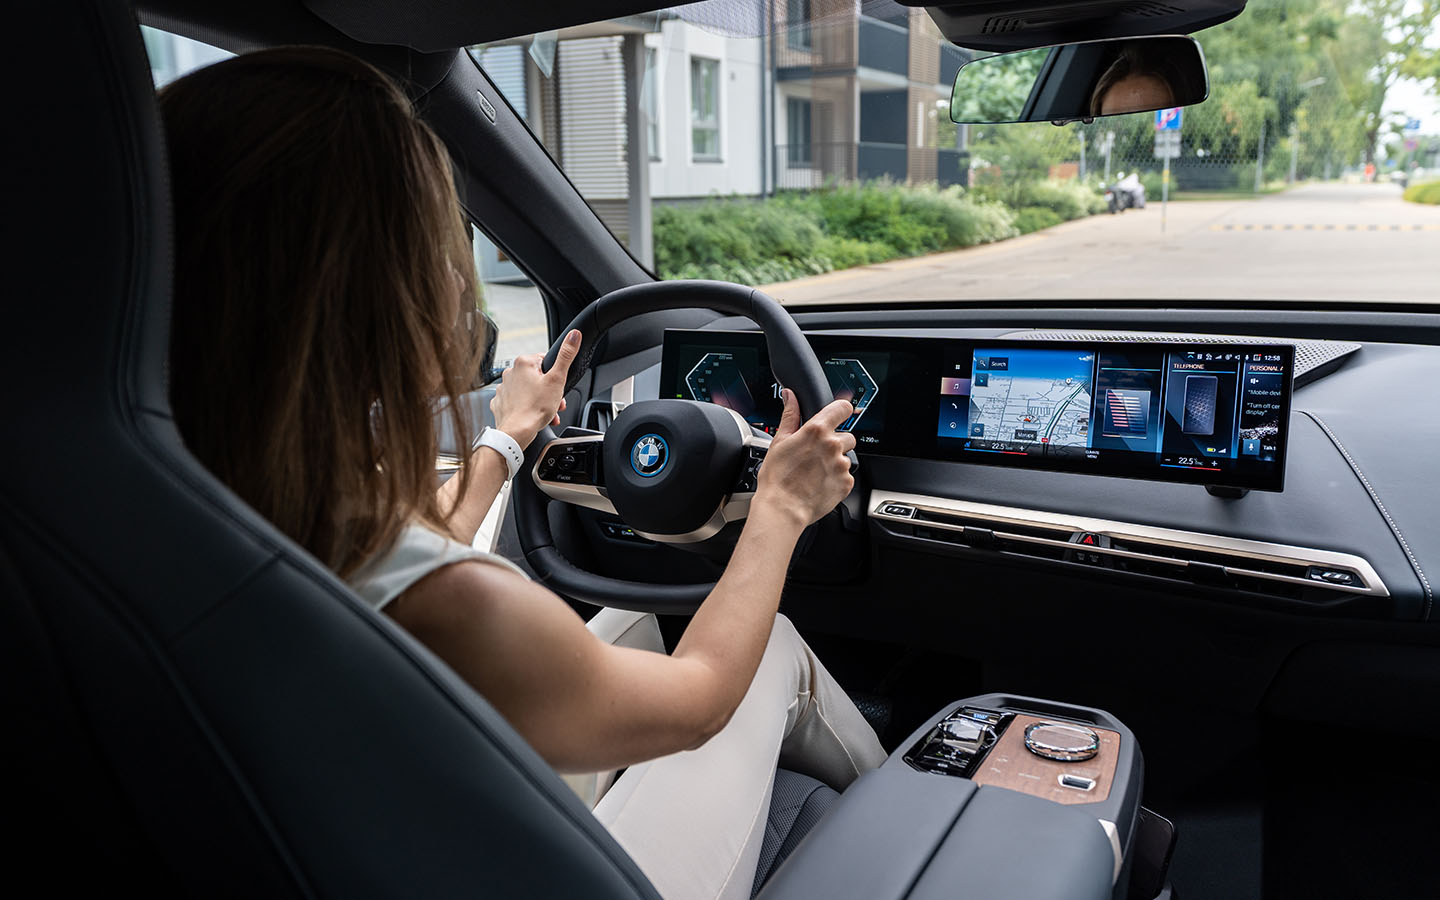 bmw offers a wide range of modern features in its vehicles